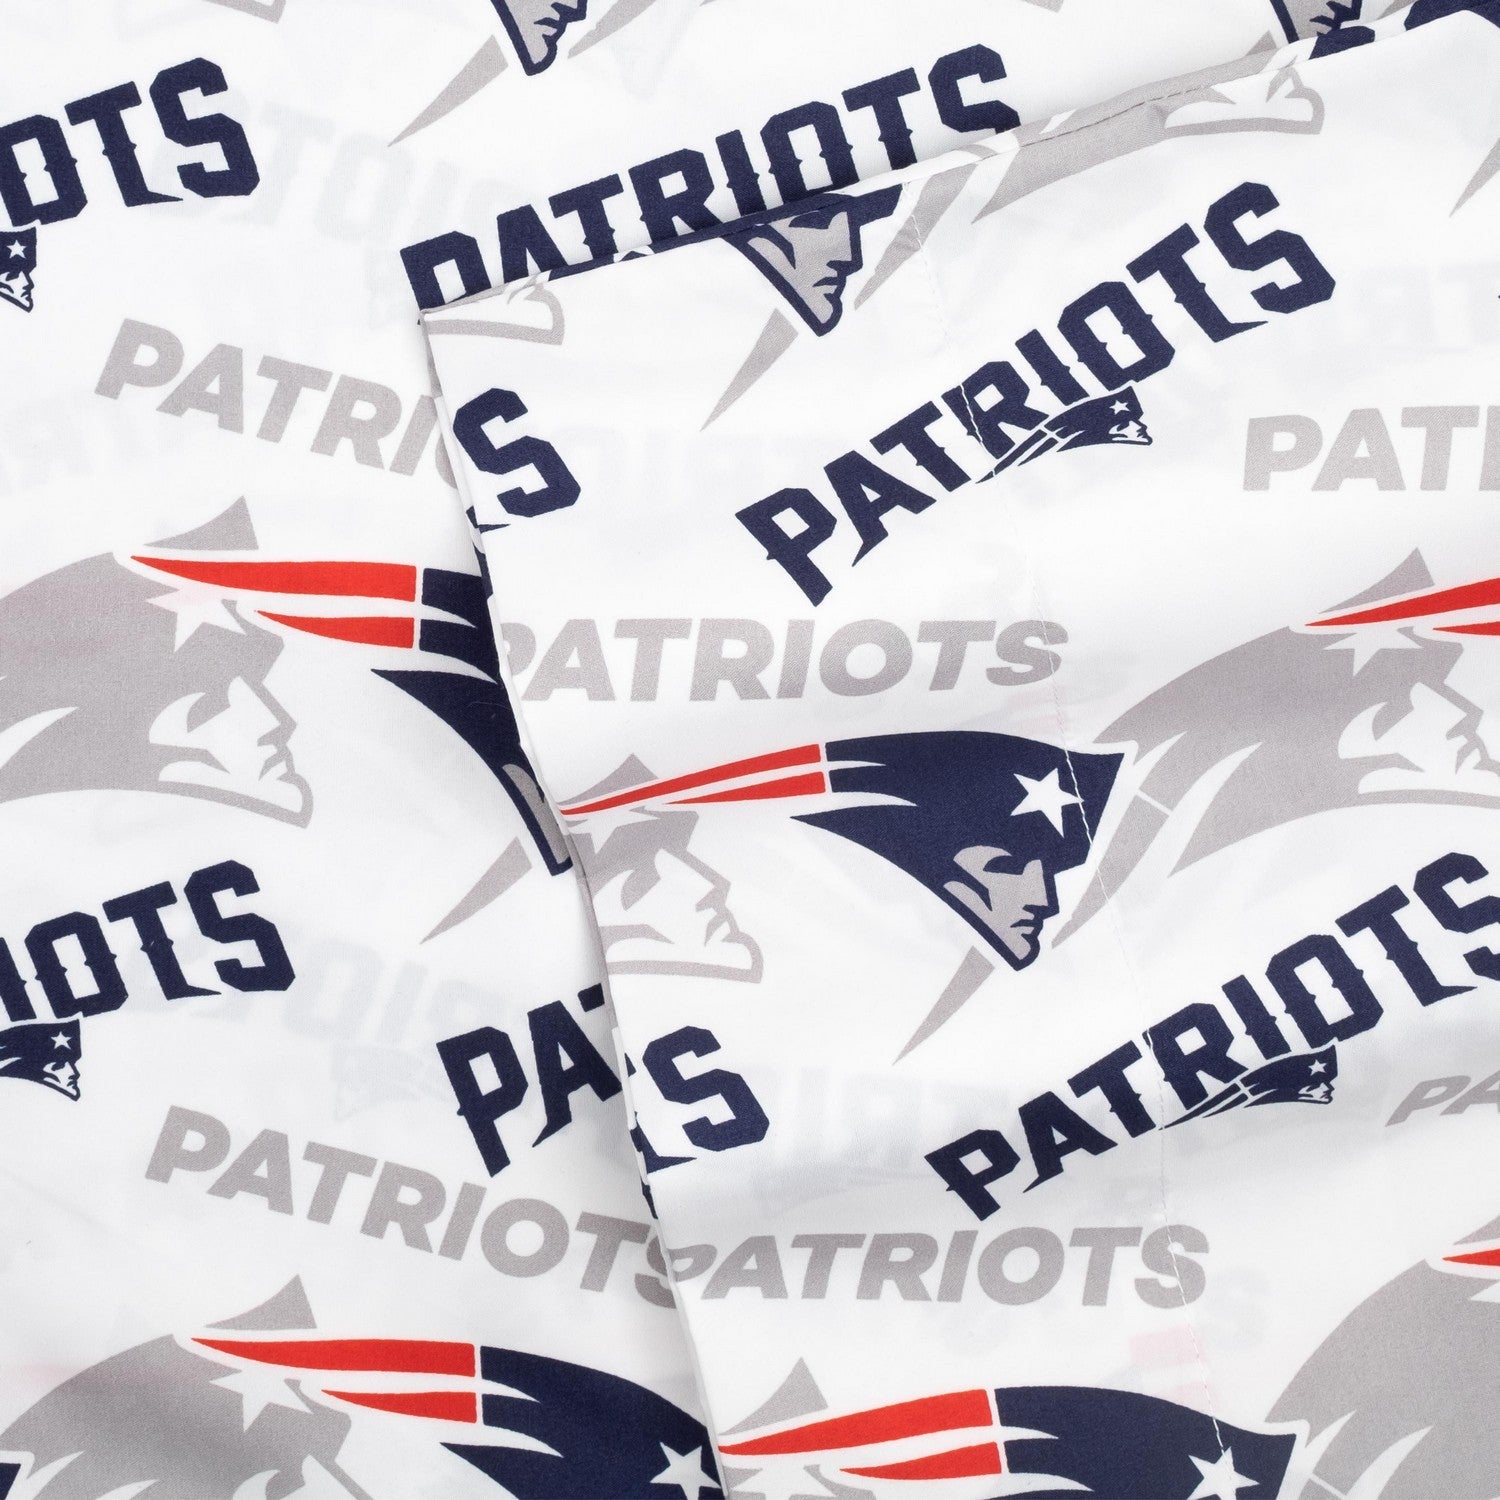 New England Patriots NFL Officially Licensed 4-Piece Sheet Set - Fabric